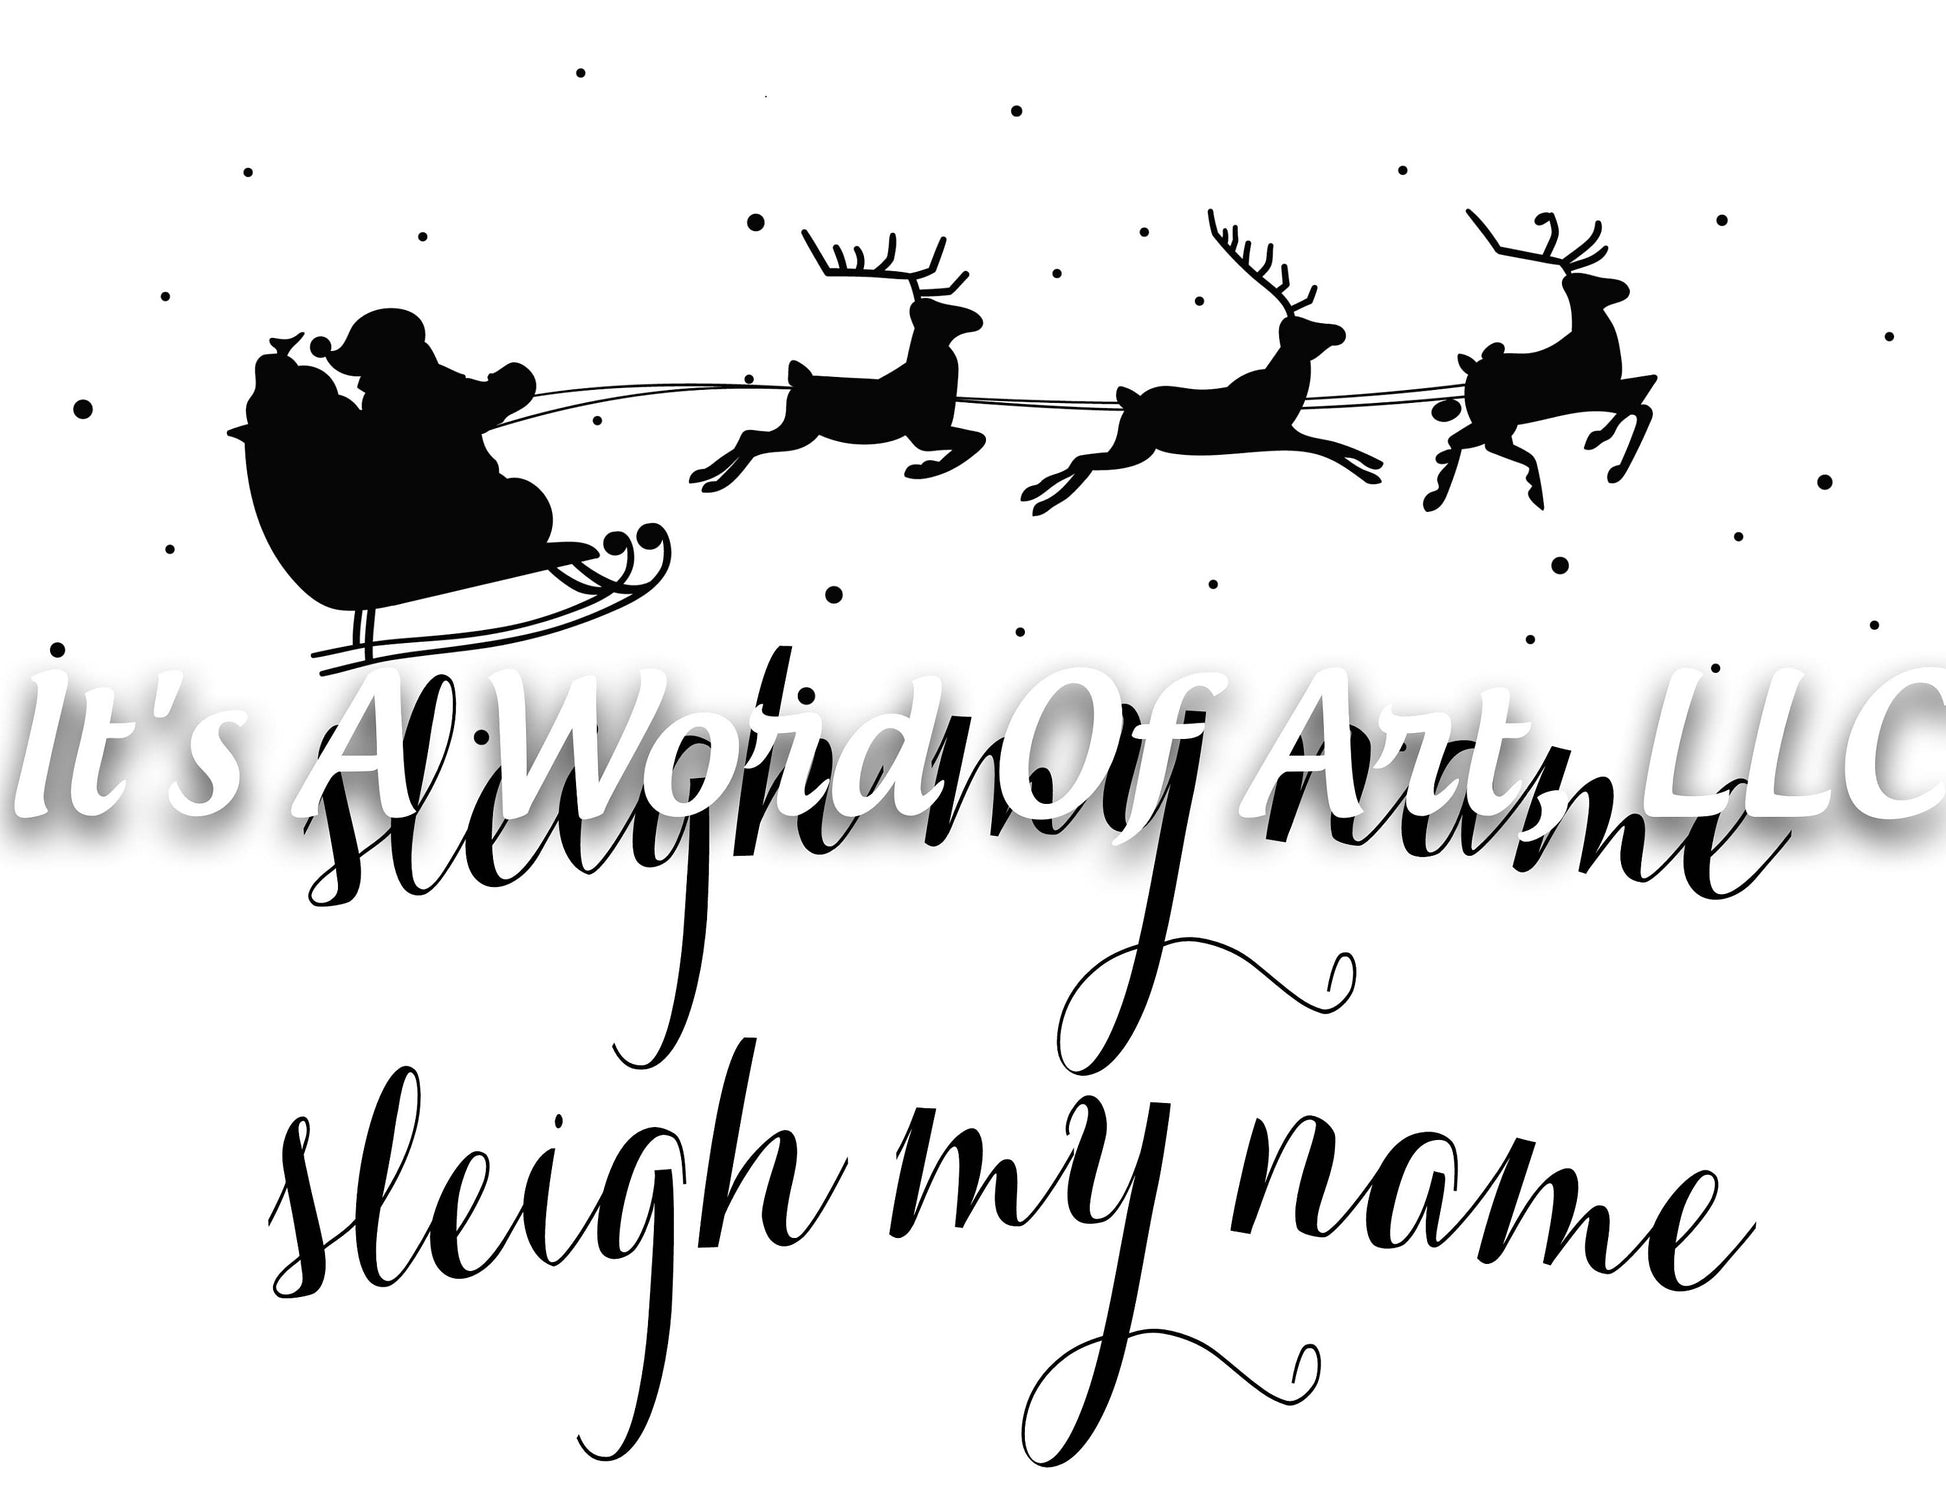 Christmas 239 - Sleigh My Name Sleigh My Name - Sublimation Transfer Set/Ready To Press Sublimation Transfer/Sublimation Transfer